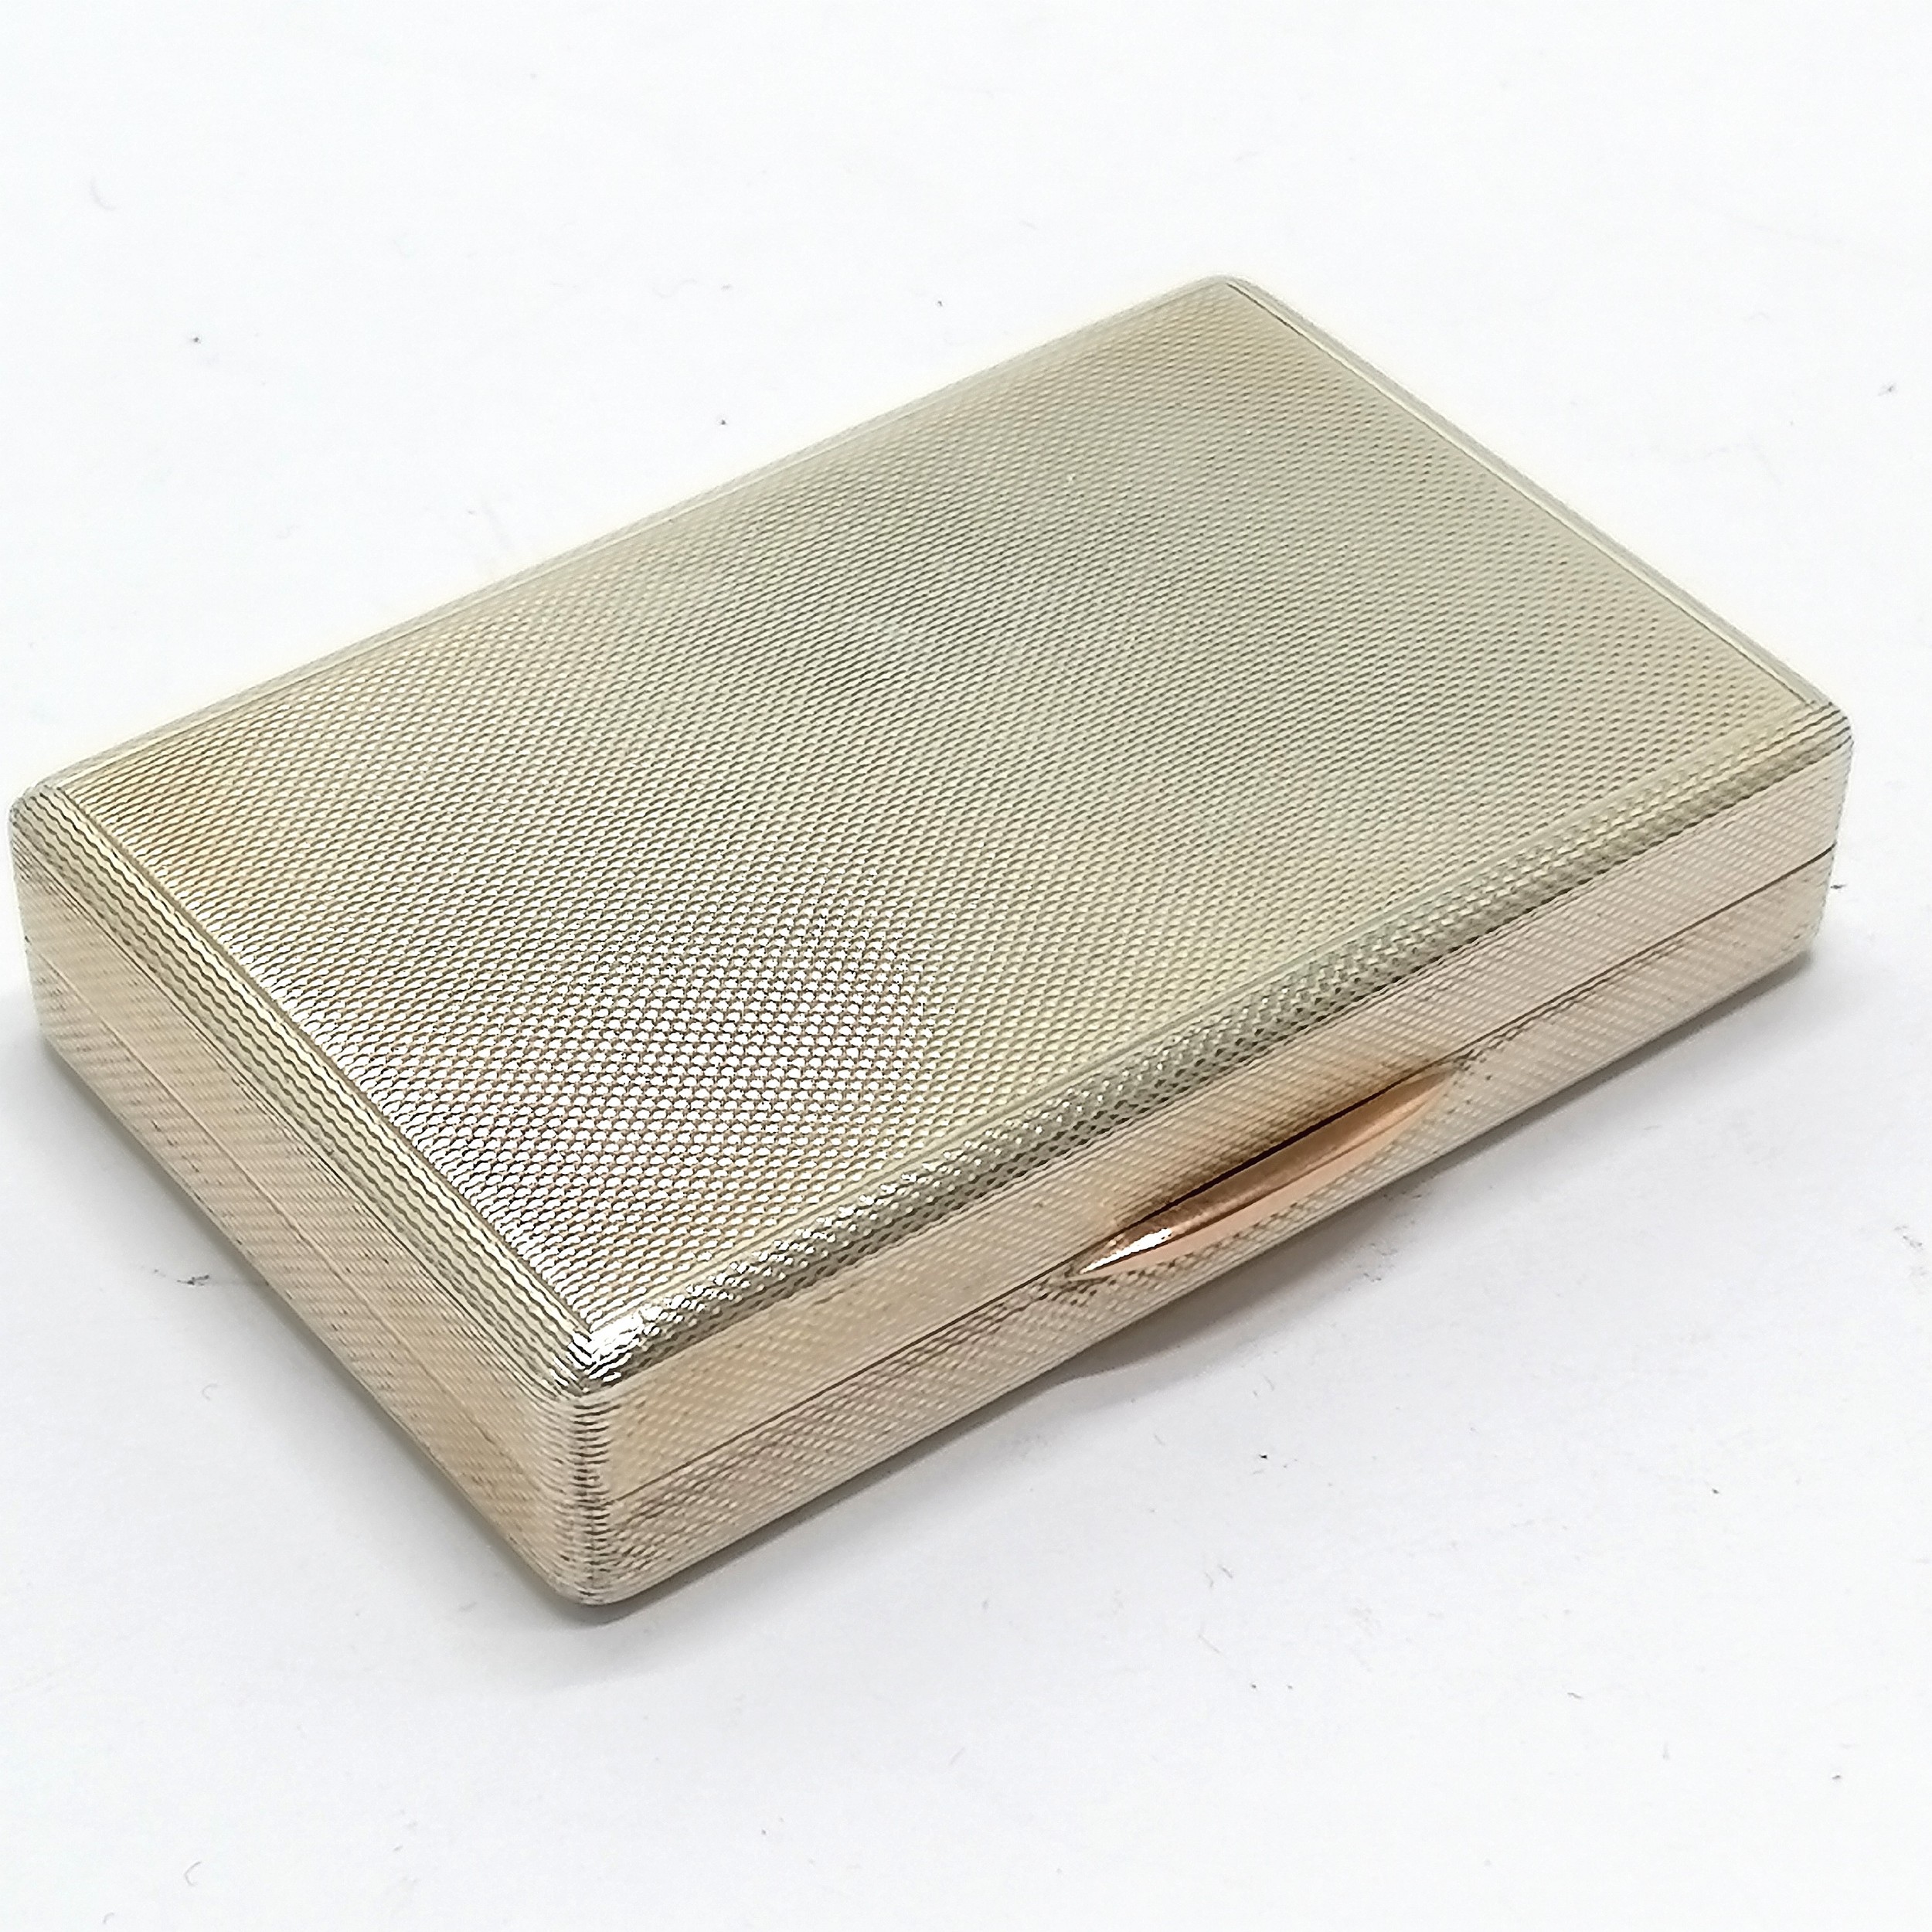 1965 silver table snuff box with gilt interior, engine turned detail and unmarked gold catch by W - Image 2 of 4